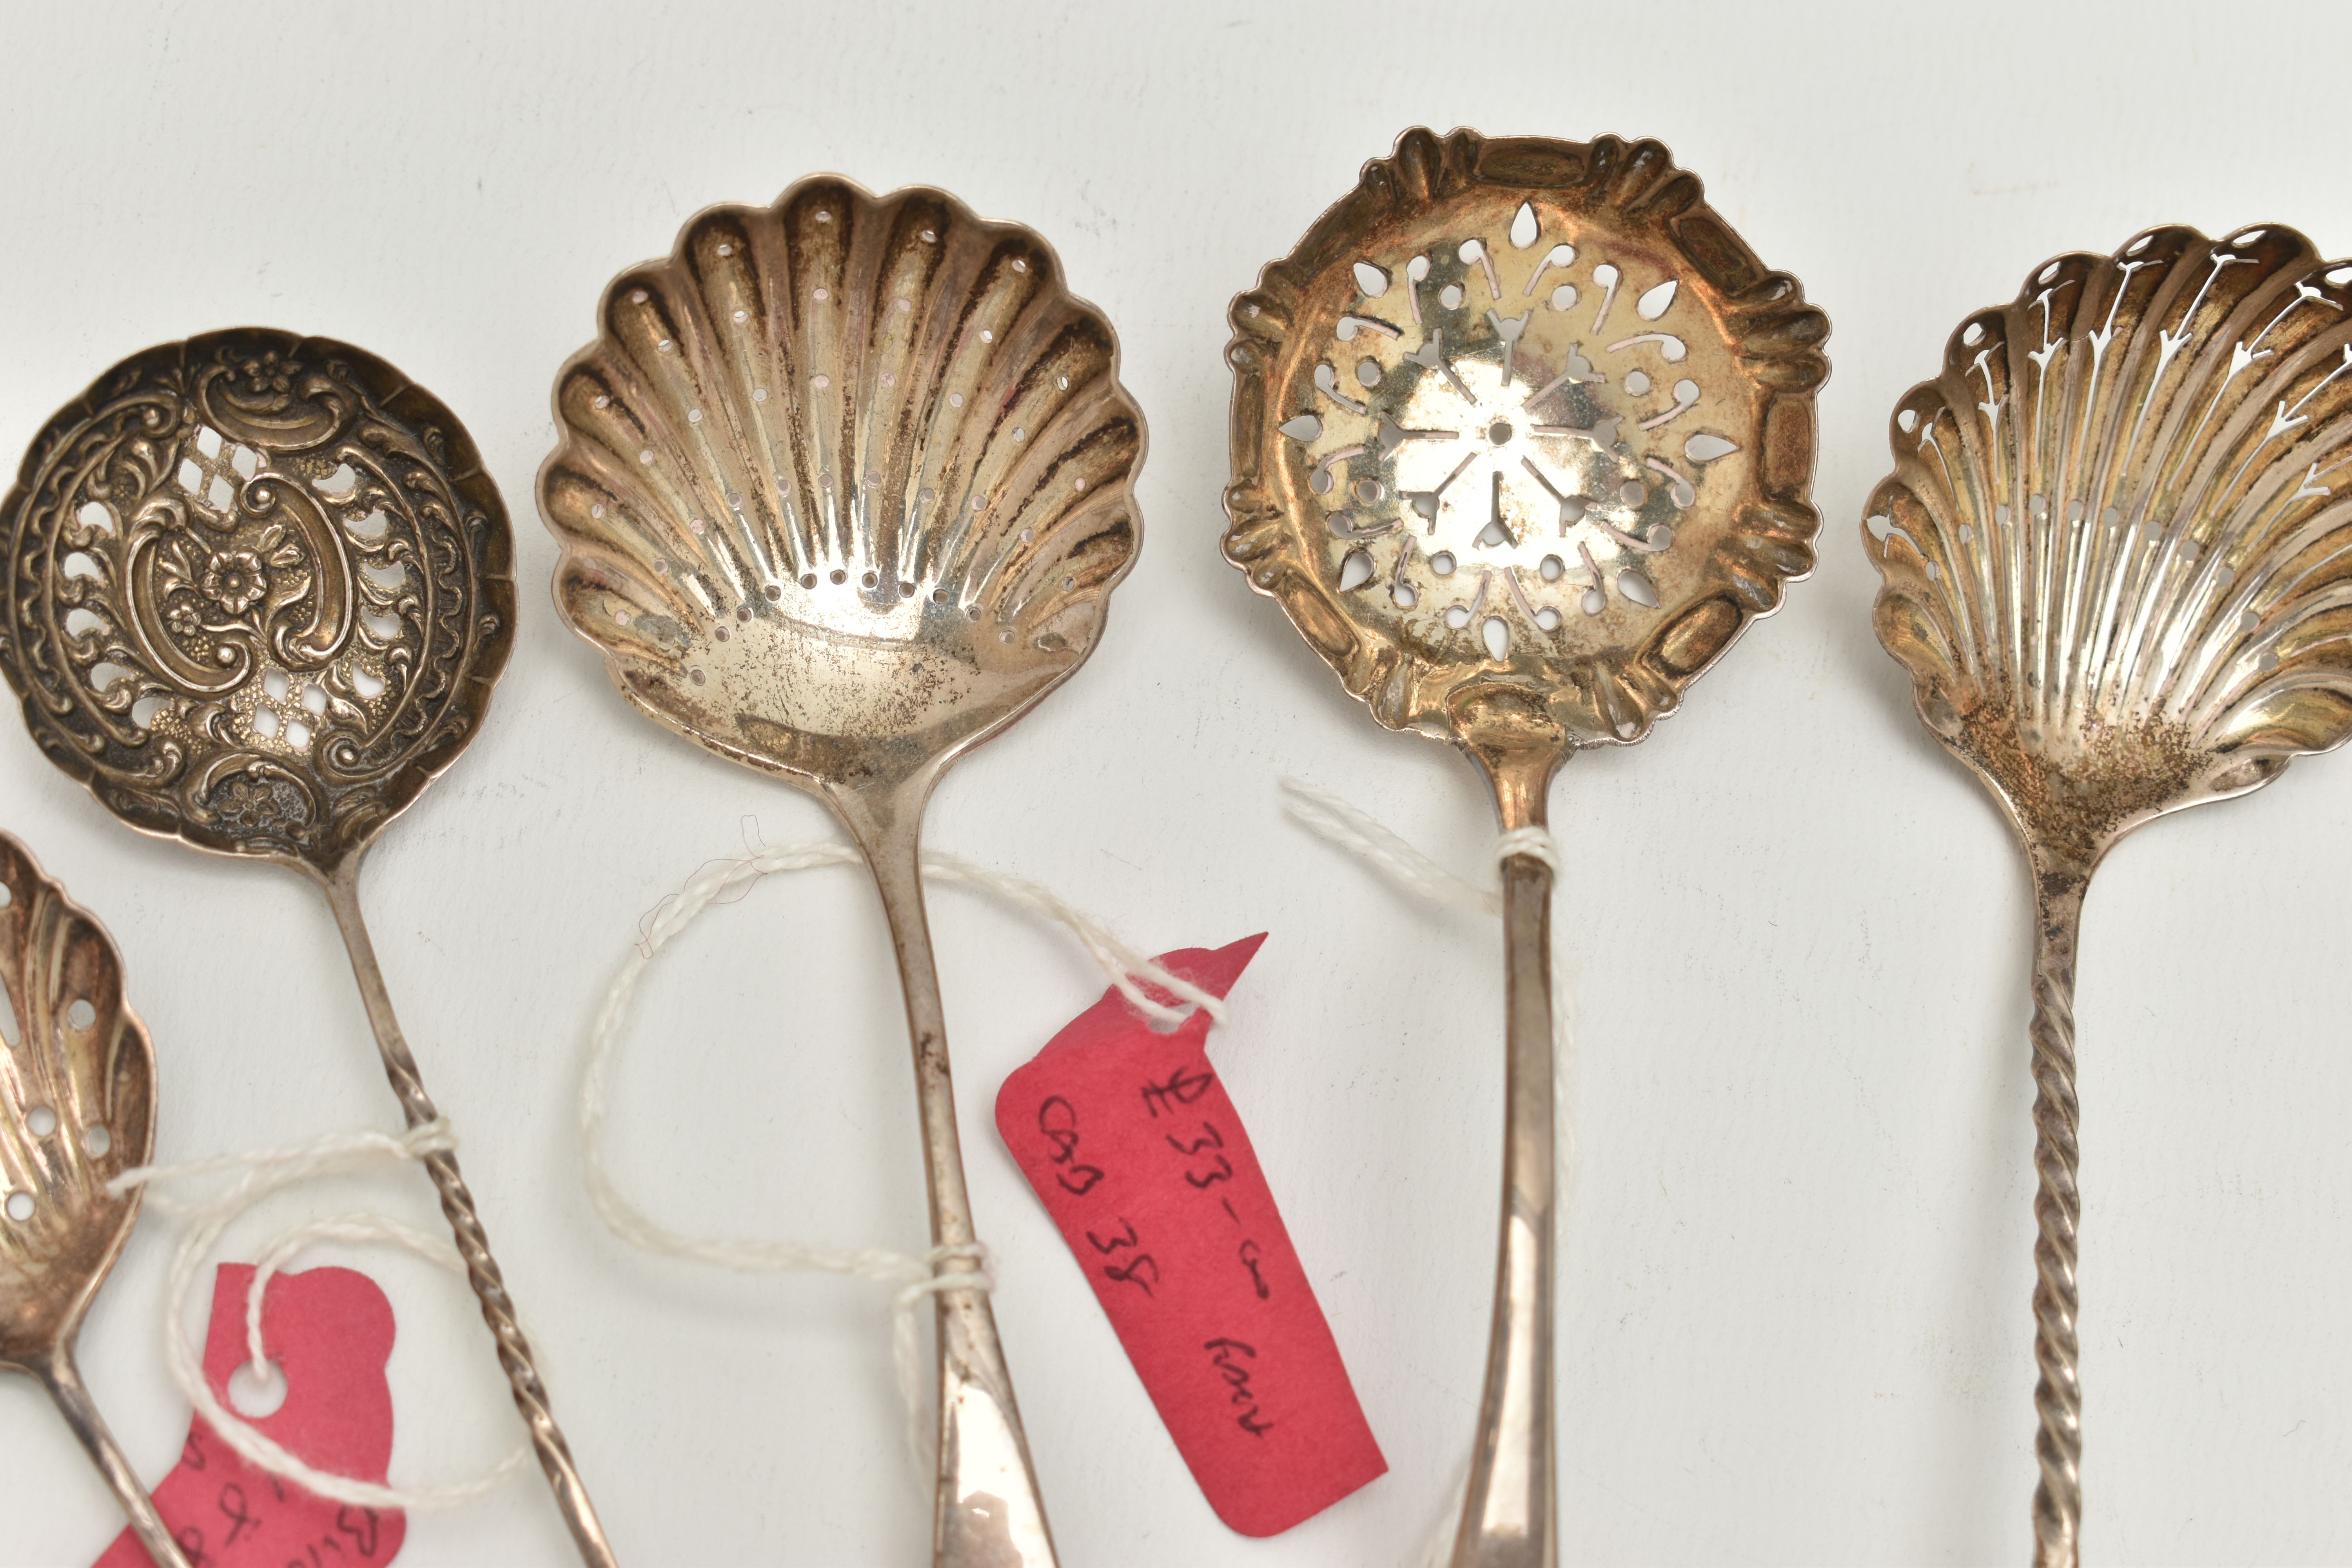 THREE SILVER CADDY SPOONS AND SIX SIFTER SPOONS, to include a 'George Unite' caddy spoon, hallmarked - Image 3 of 6